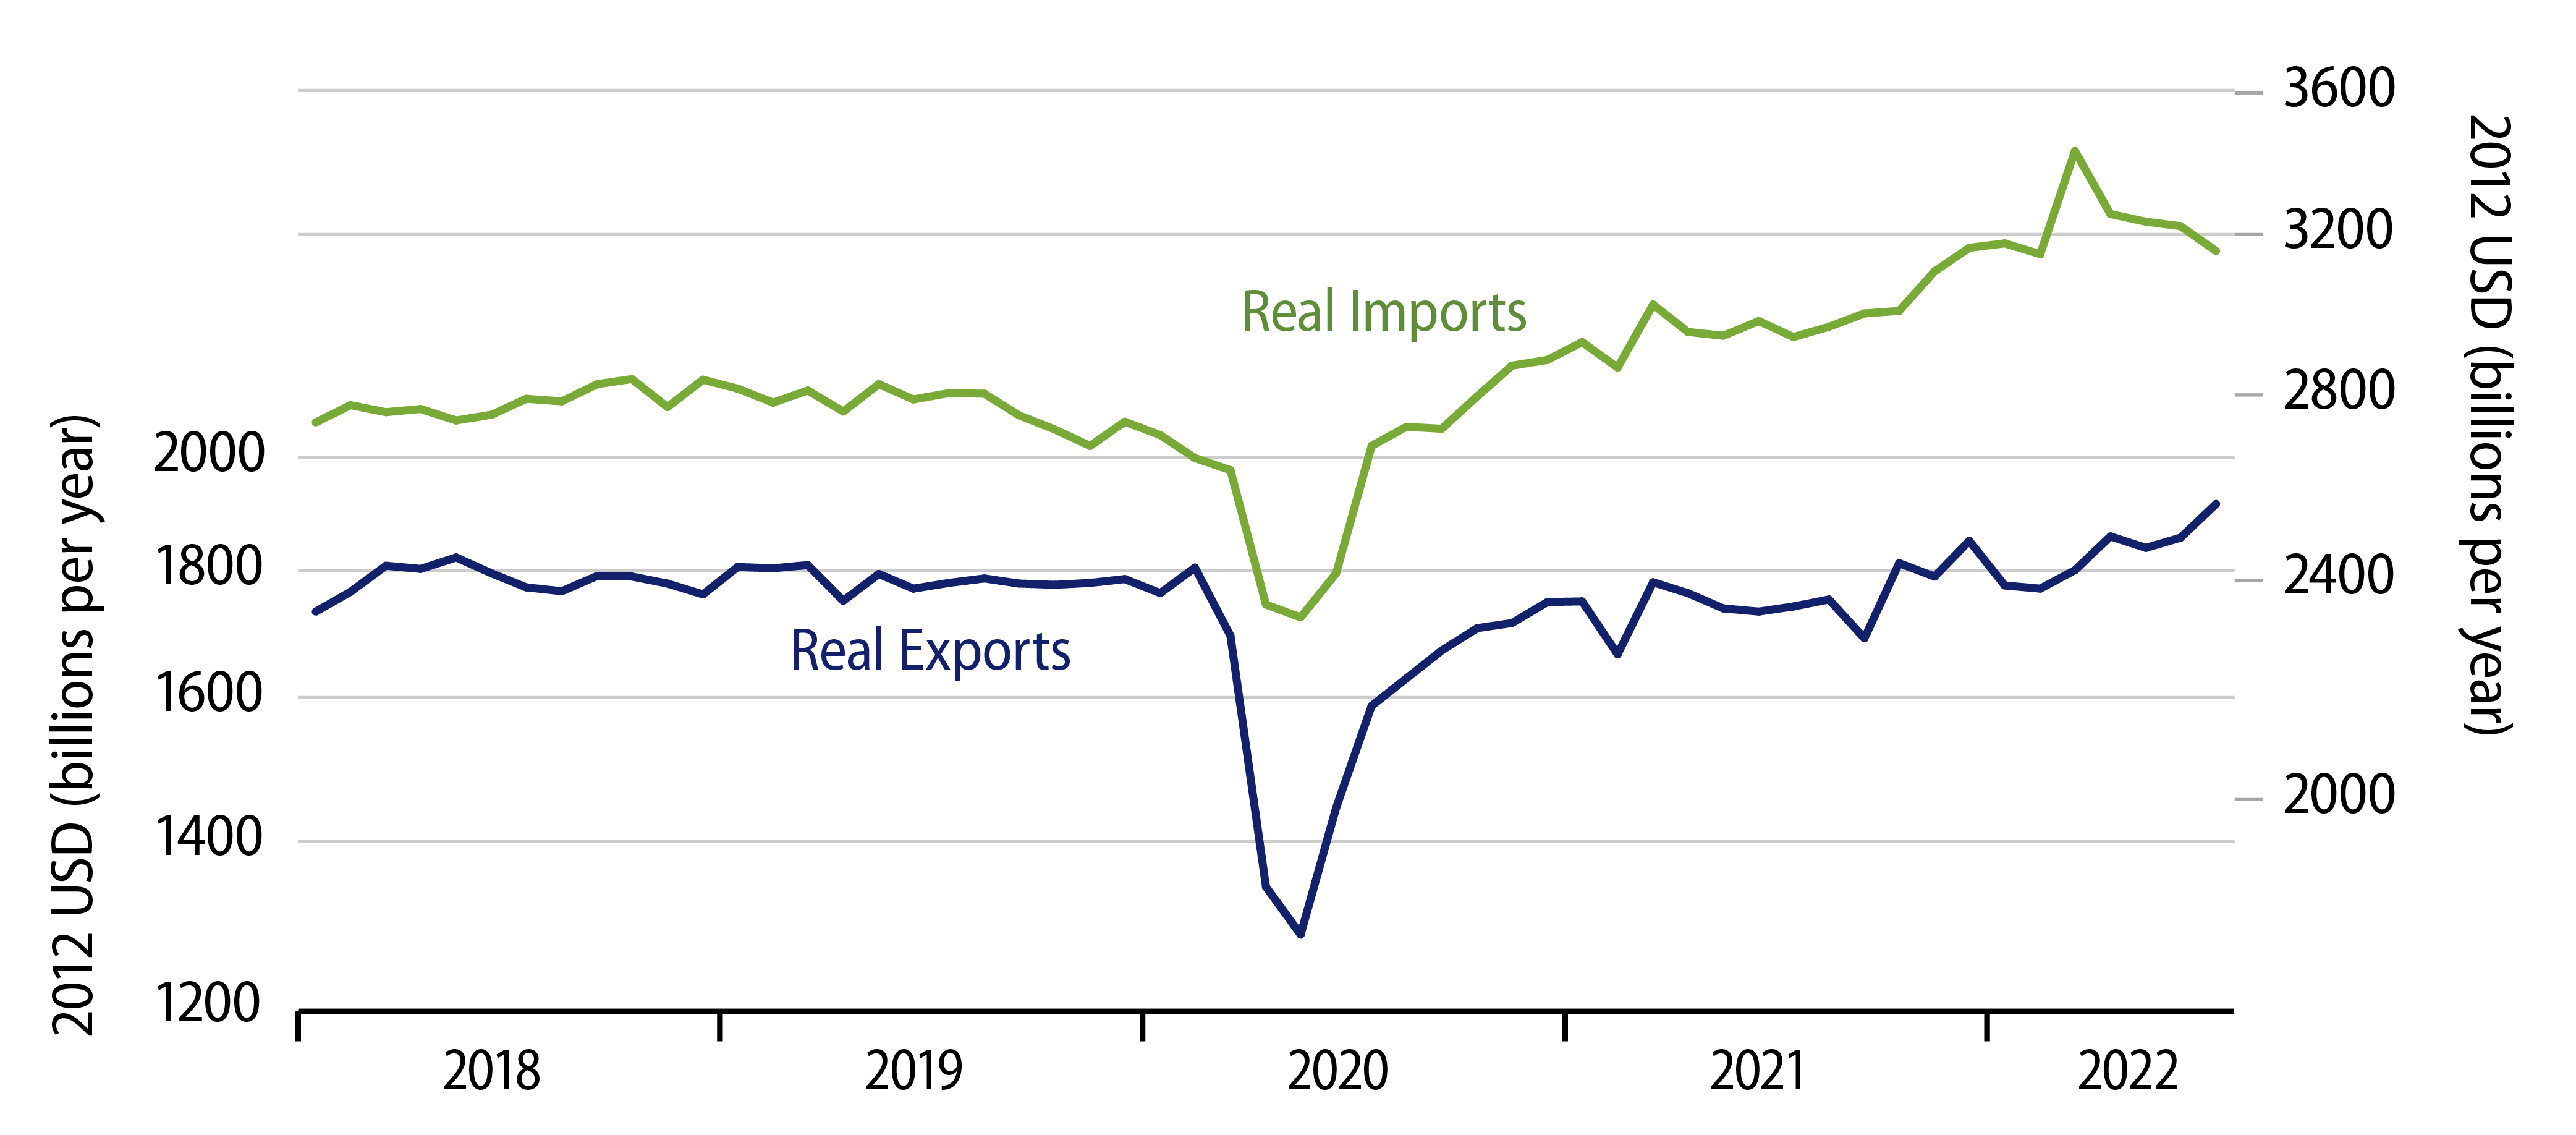 Explore Real Exports & Imports of Goods